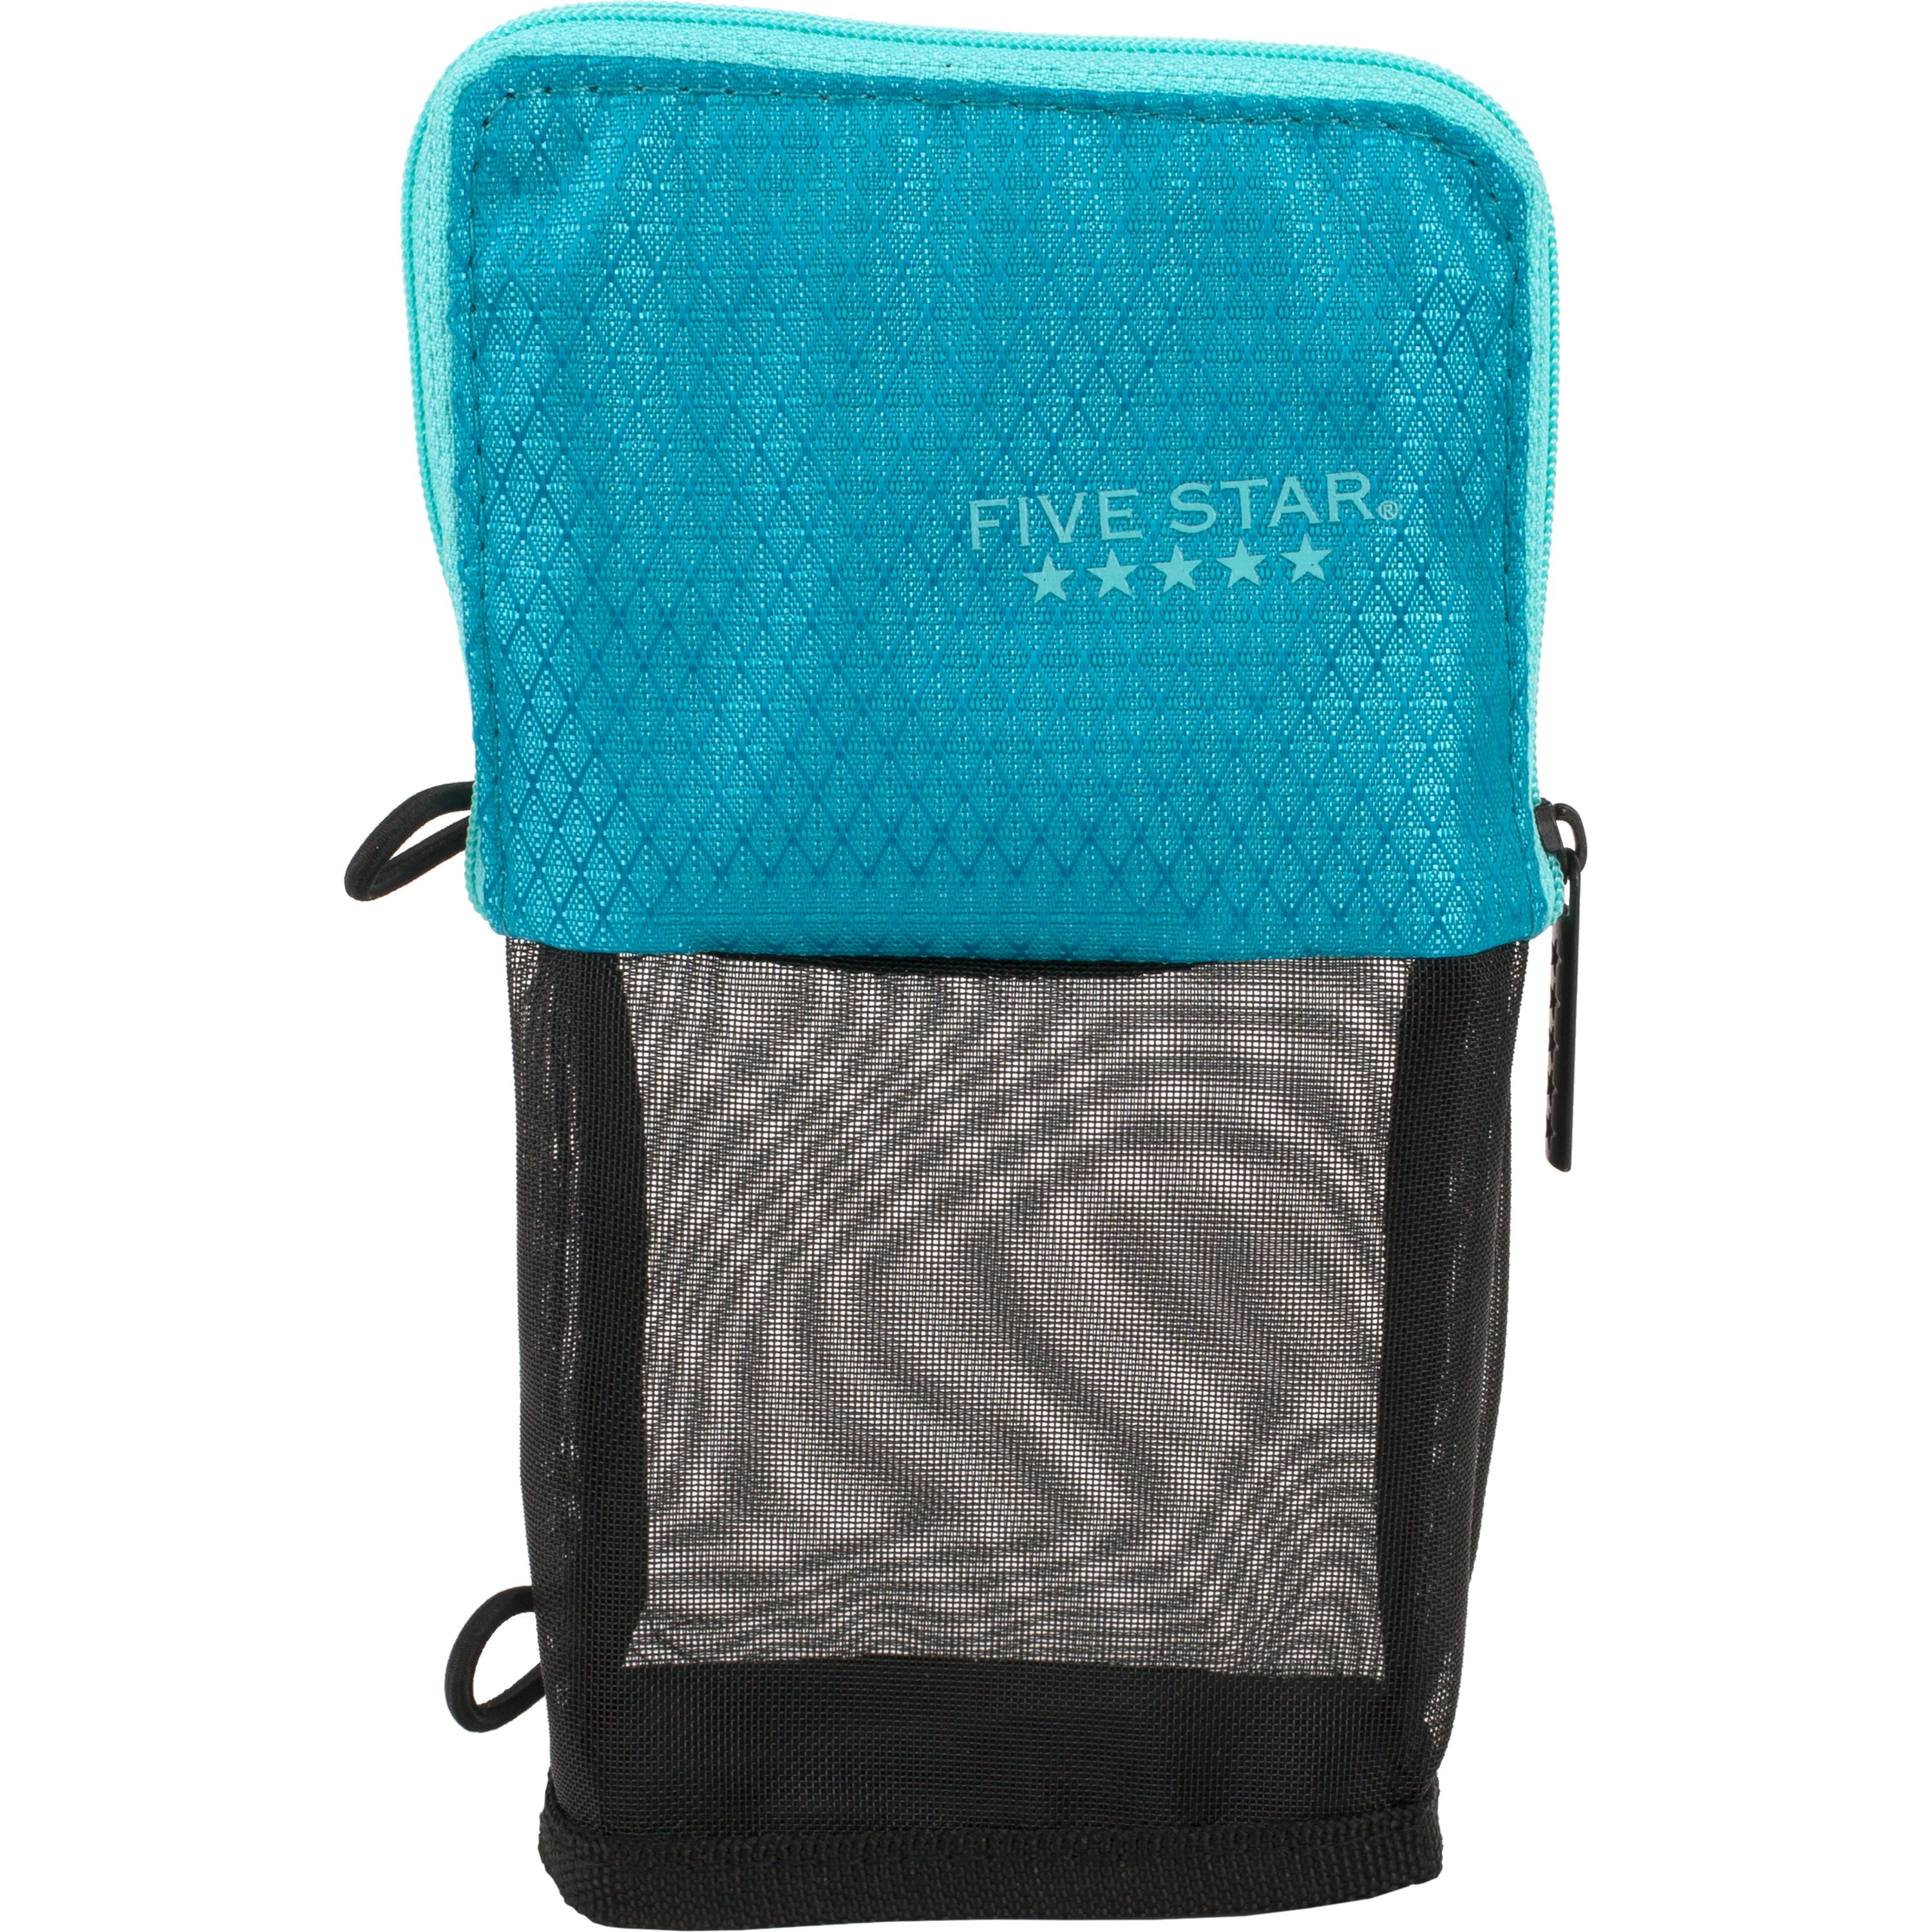 Teal 3 Ring Binder Five Star Xpanz Pencil Pouch 